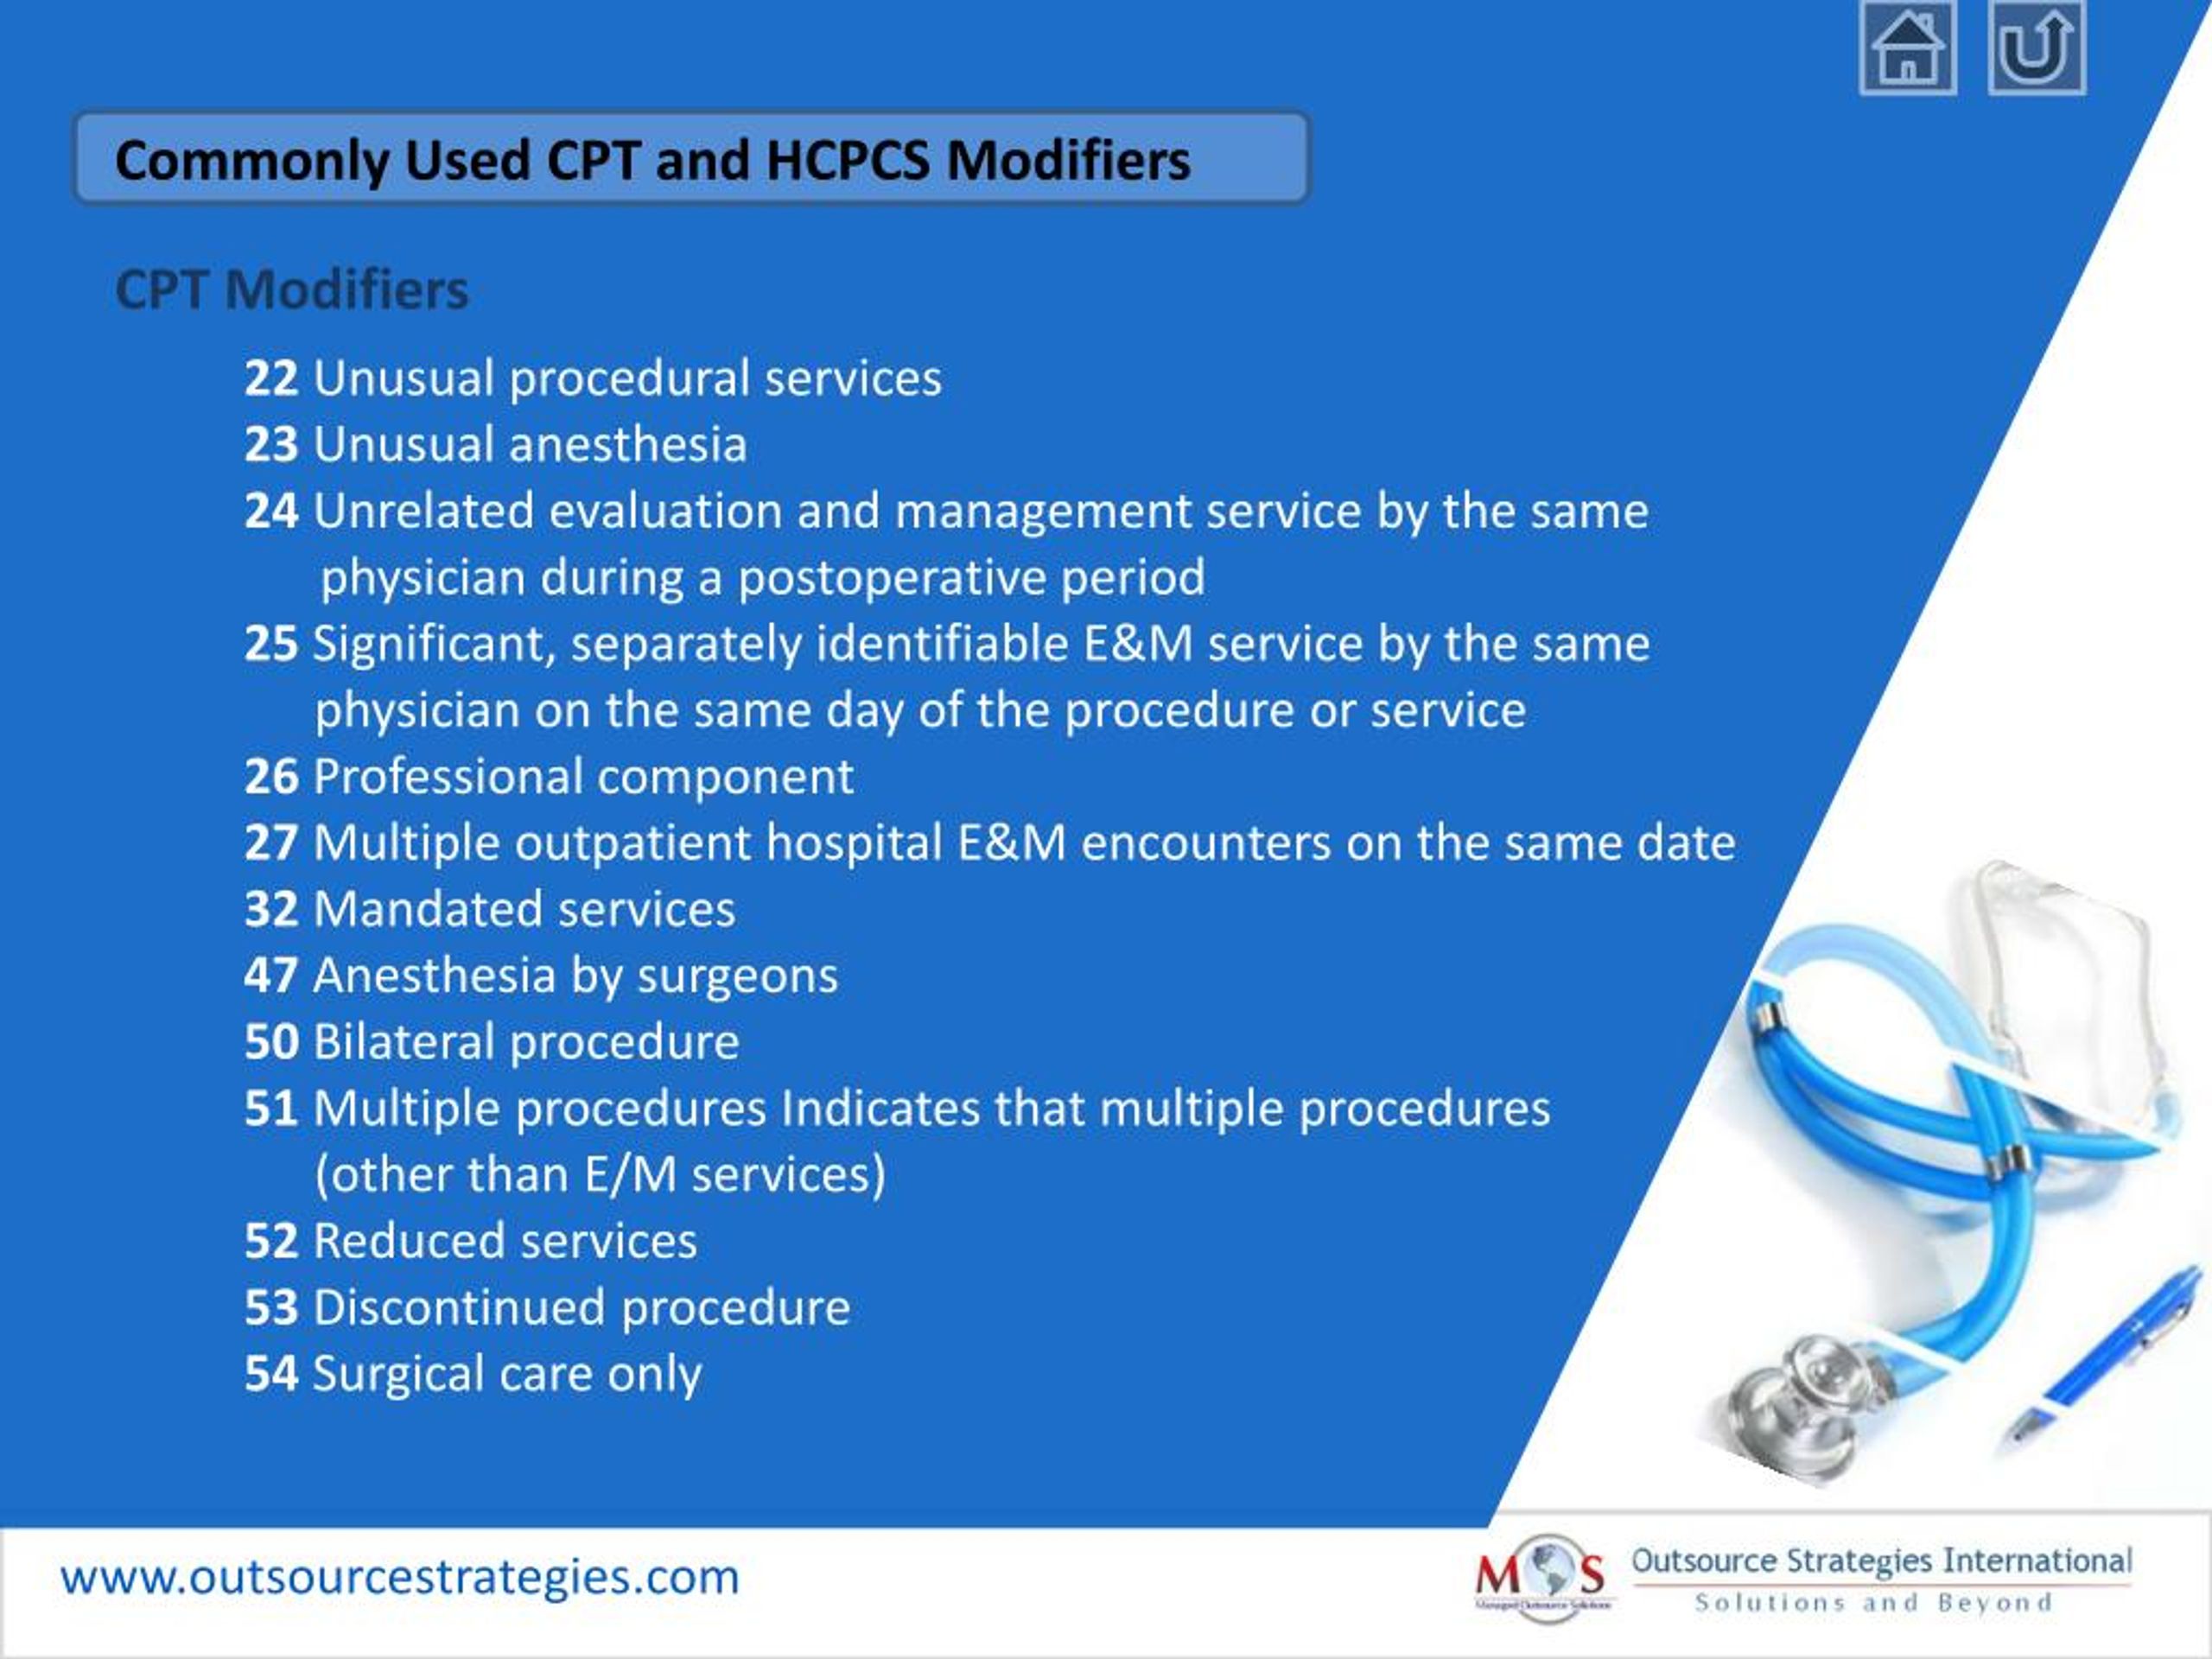 PPT What are Medical Coding Modifiers? Examples of CPT, HCPCS and